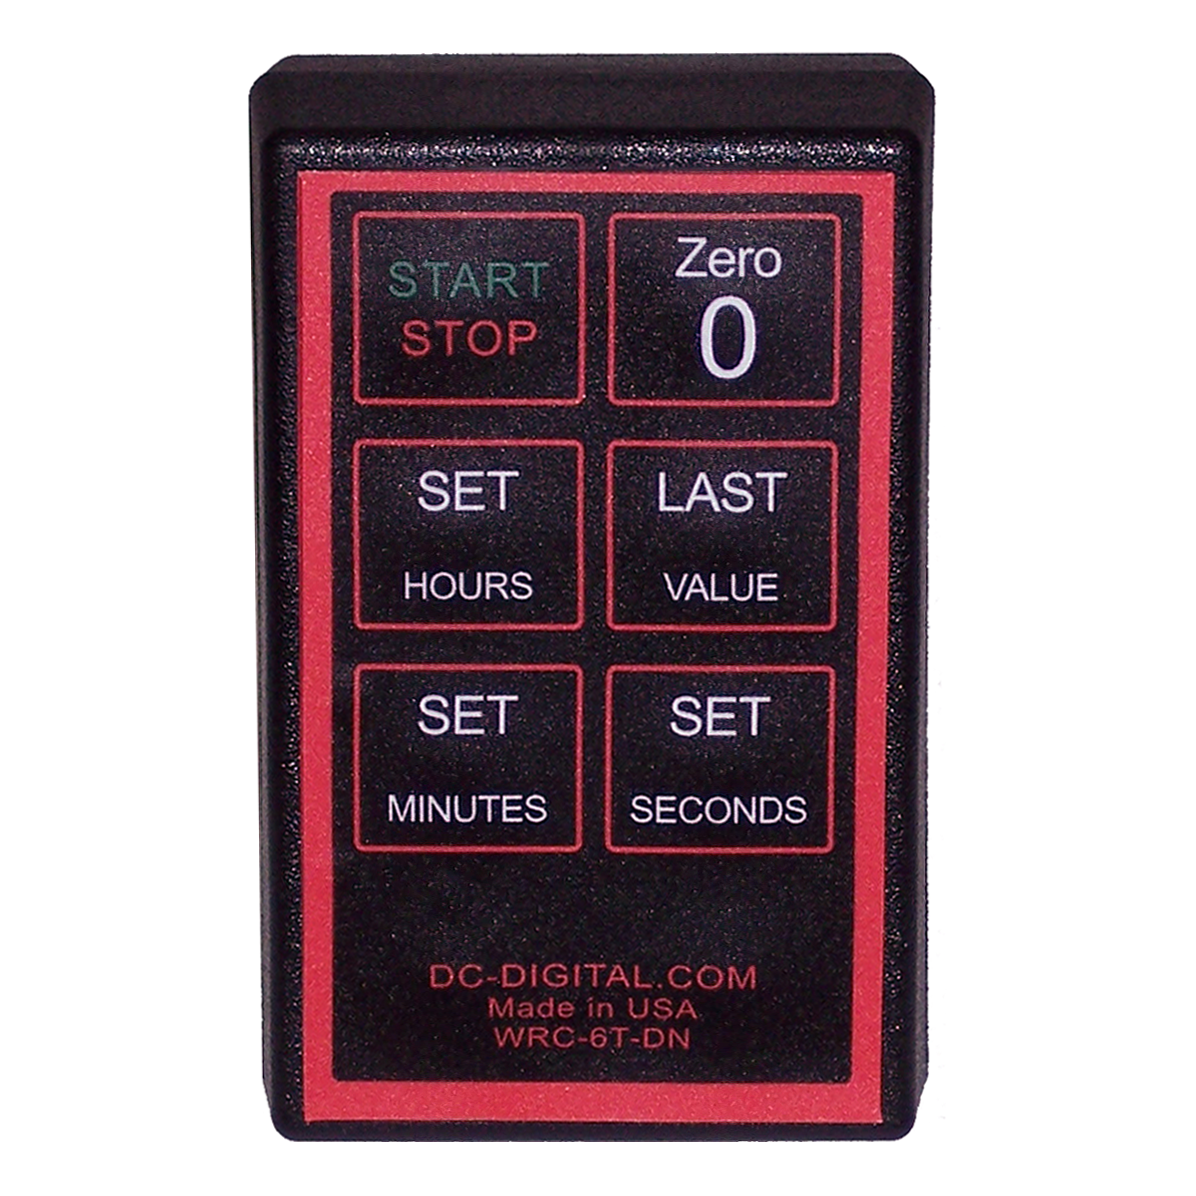 (WRC-6T) Wireless Handheld Remote Control for DC-Digital Countdown Timers